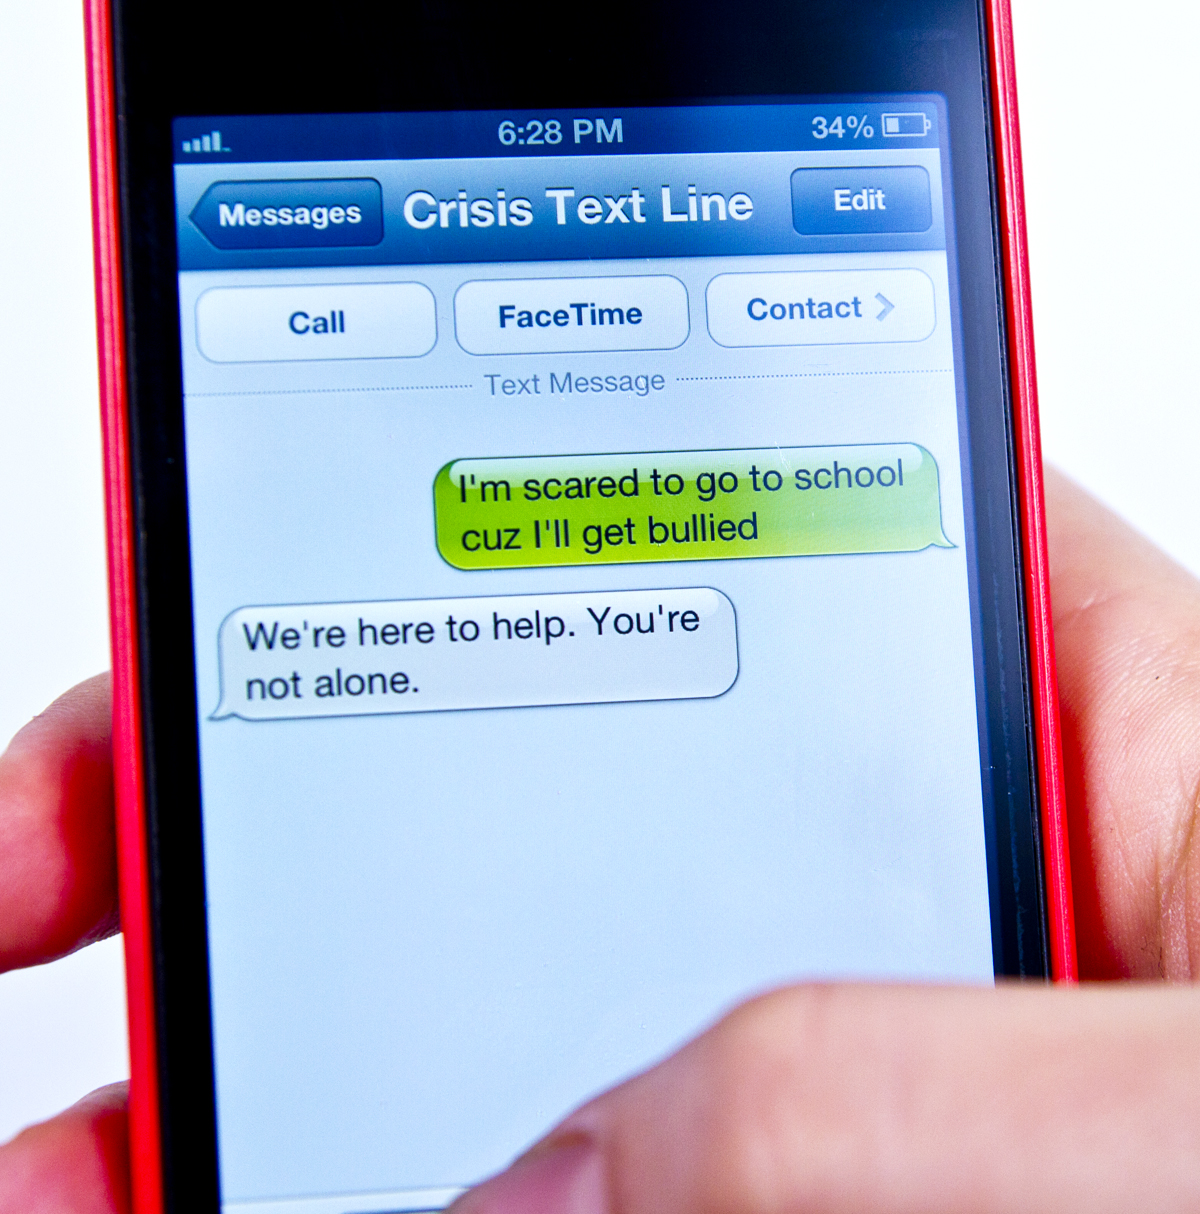 “Crisis Text Line brings suicide prevention into age of texting”